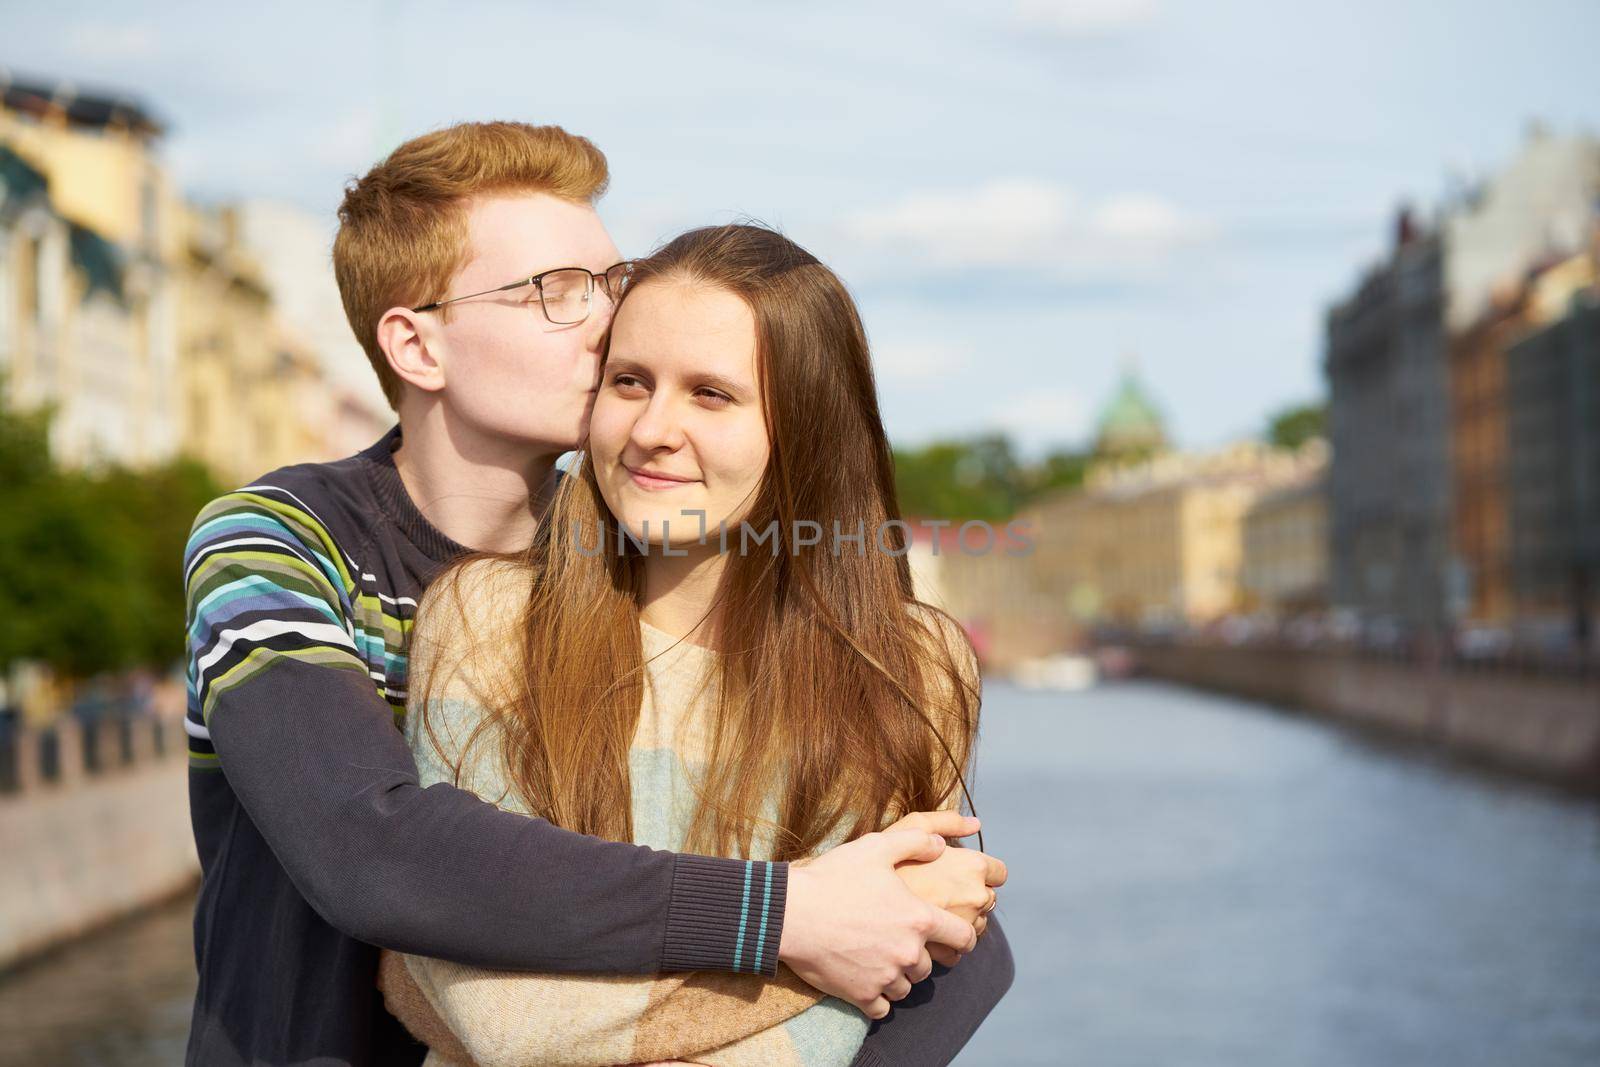 red-haired man kisses a woman on her hear, a boy in a sweater comforts a girl with long dark thick hair, copy space